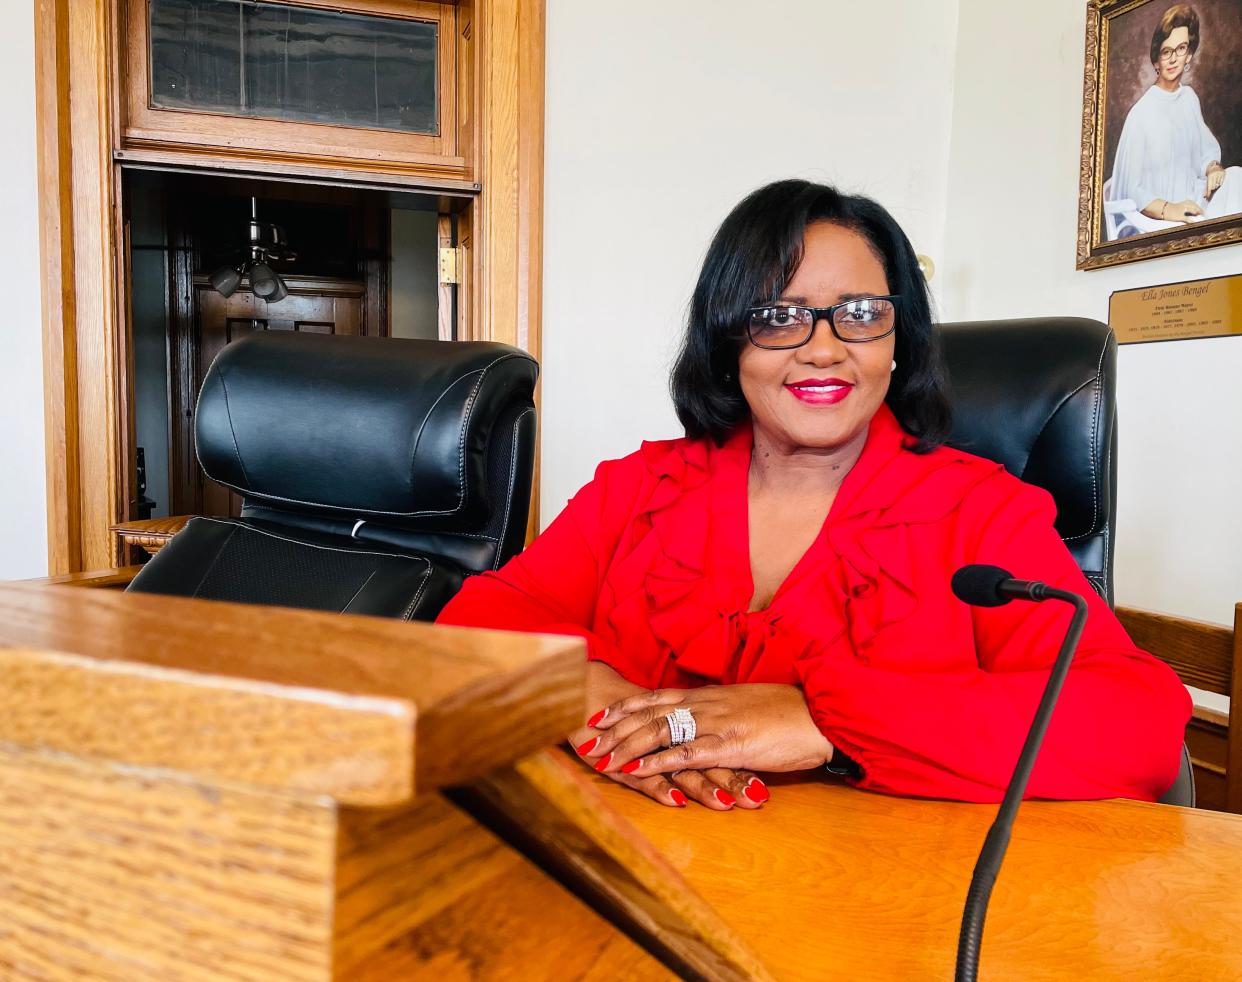 New Bern Alderwoman Hazel Royal will hold a town hall meeting on Feb. 6 for residents of the city's Ward 2 to voice their concerns to government officials and staff.